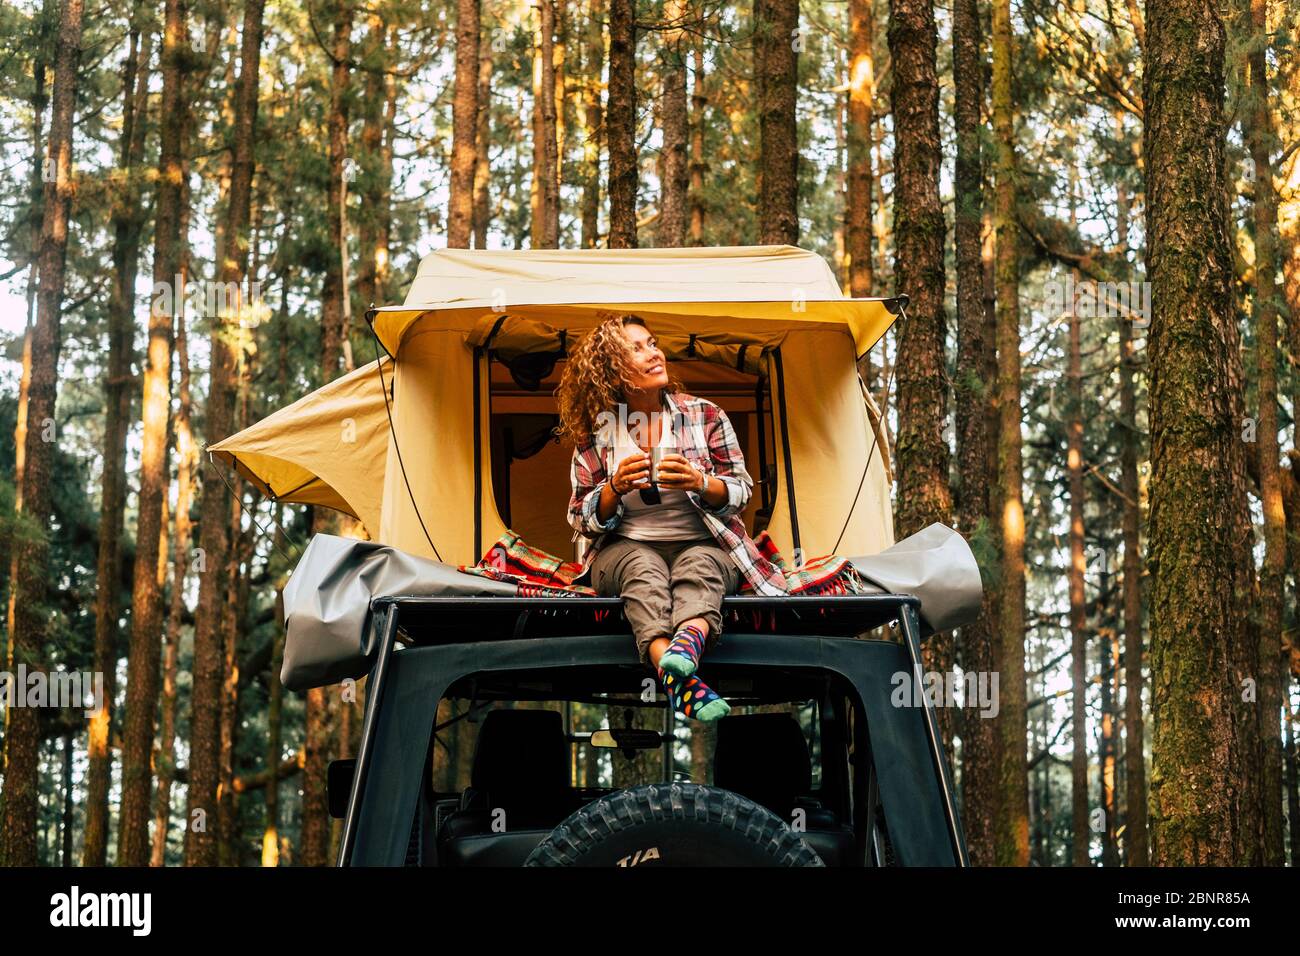 Travel and wanderlust lifestyle concept with happy lonely adult woman sit down on the roof tent car vehicle with wood forest in background enjoying nature and outdoors vacation Stock Photo